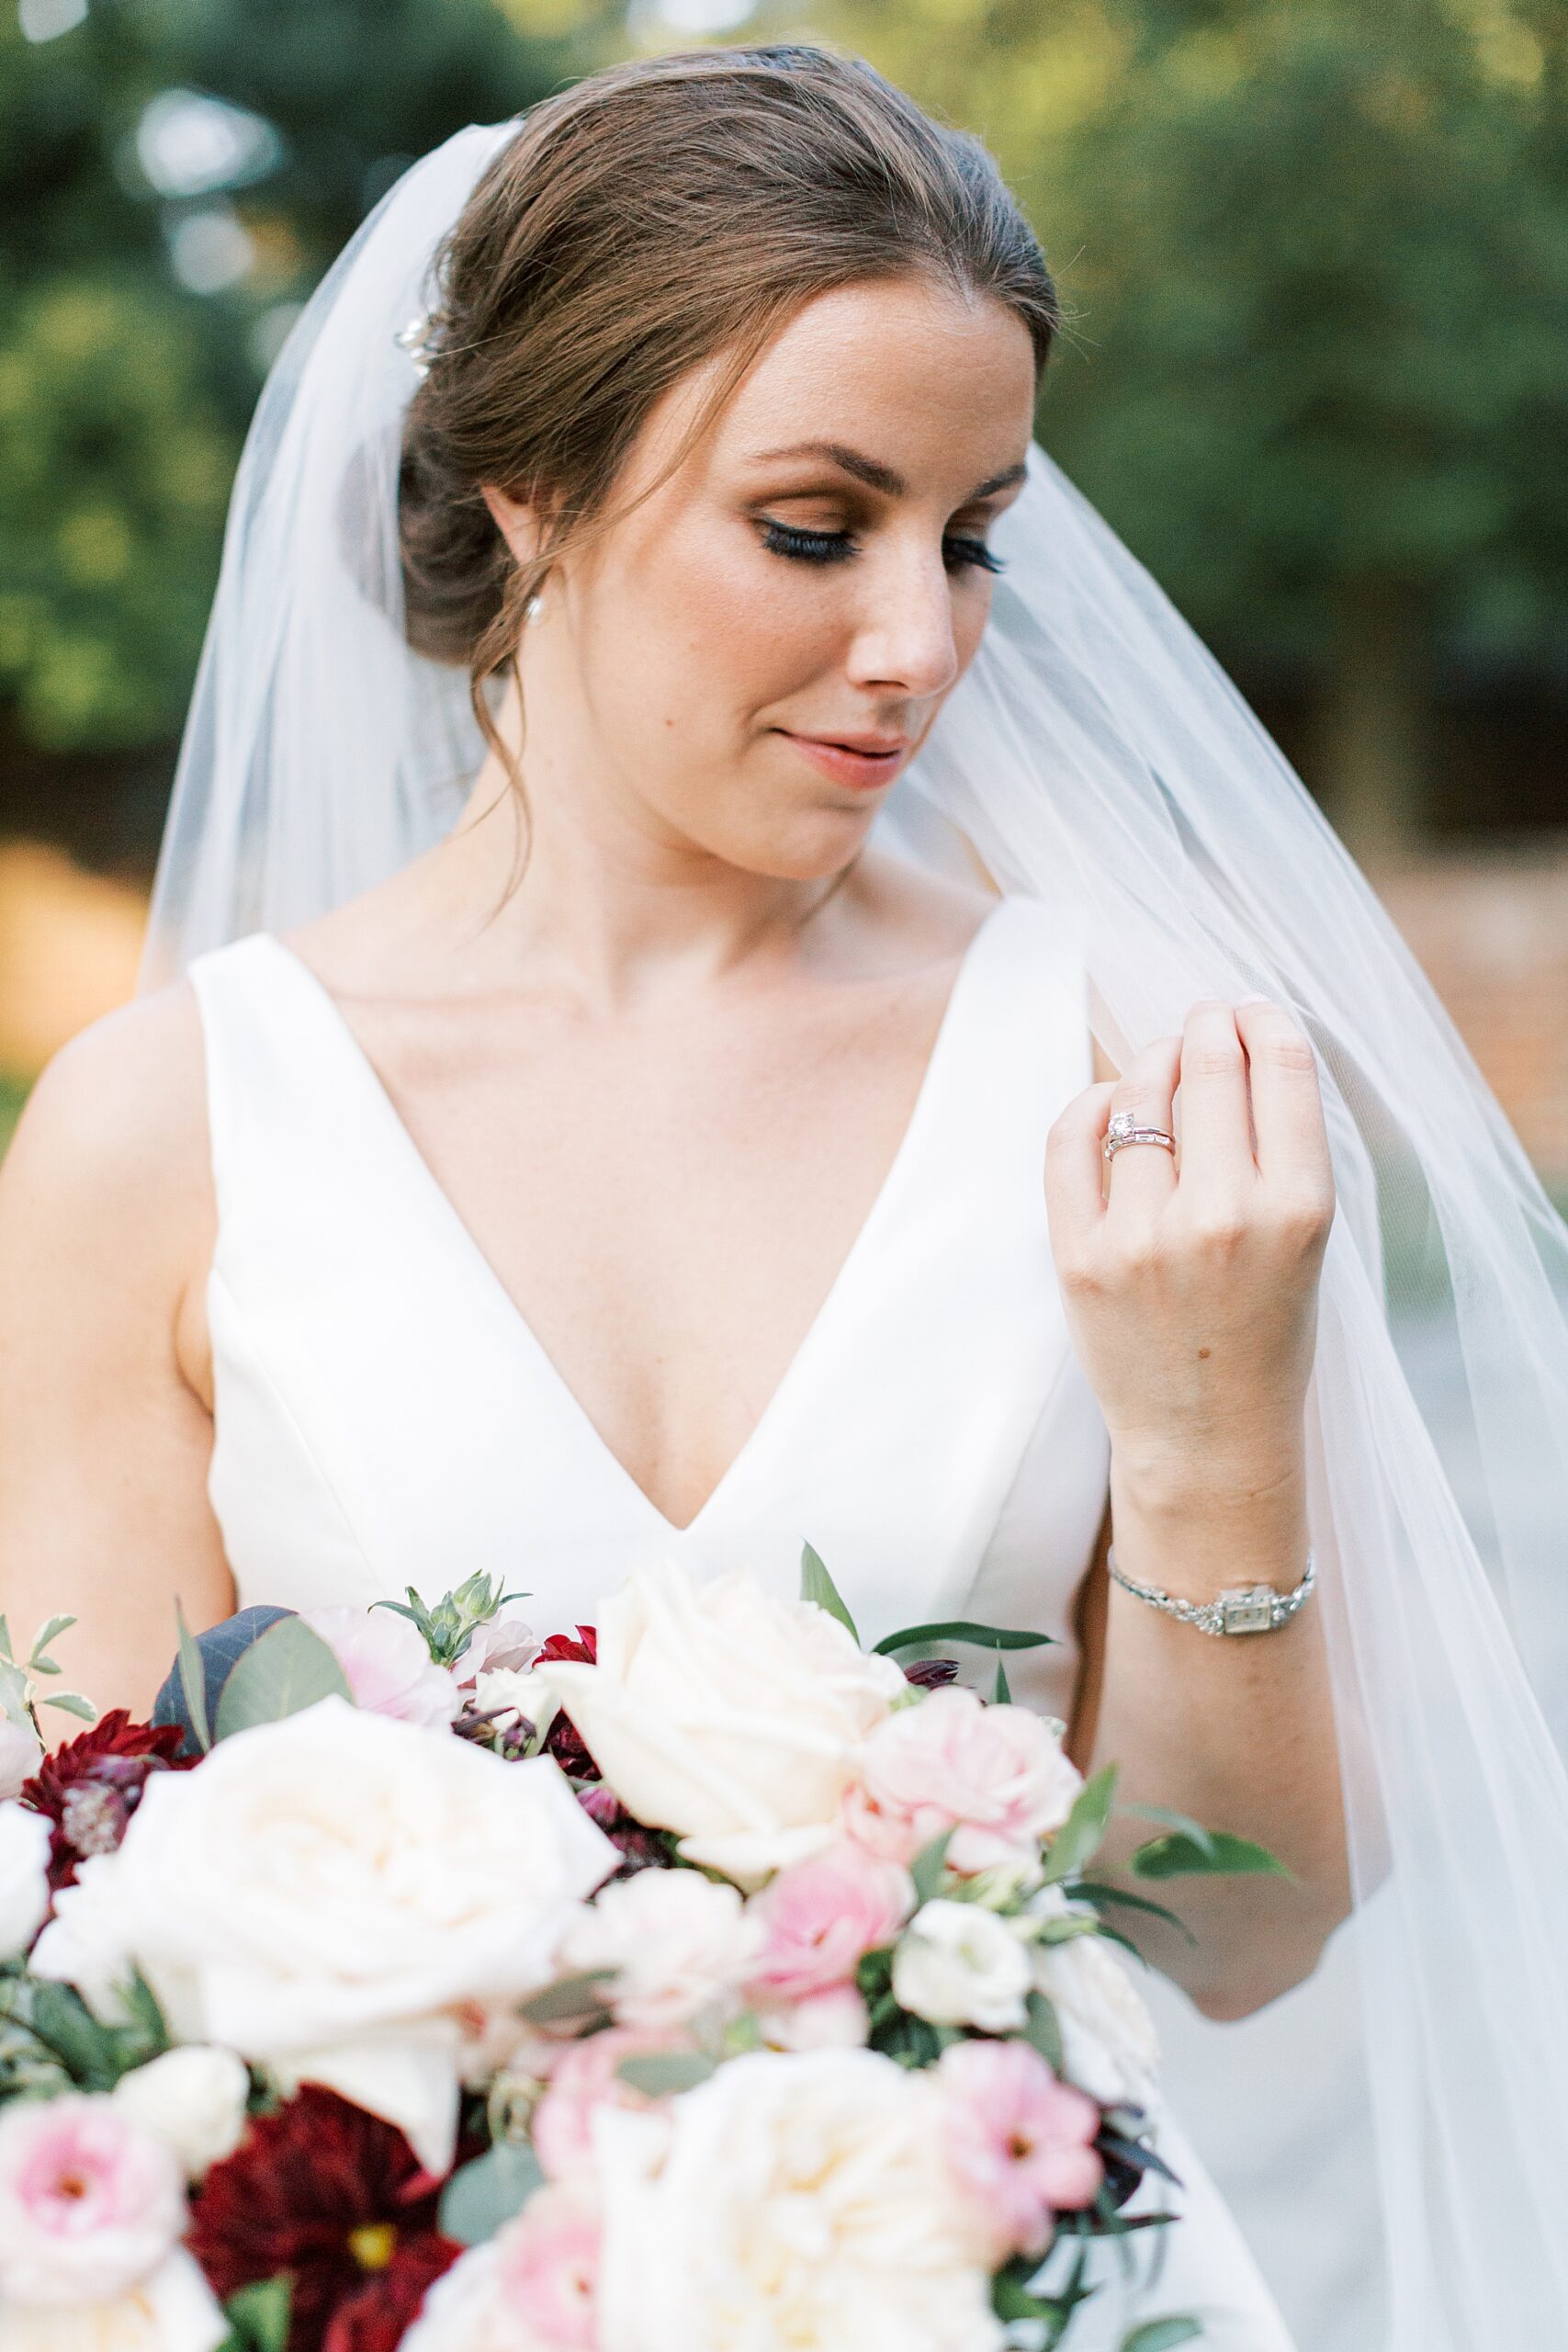 bride stands pulling veil around shoulders holding bouquet of pink, white, and red flowers